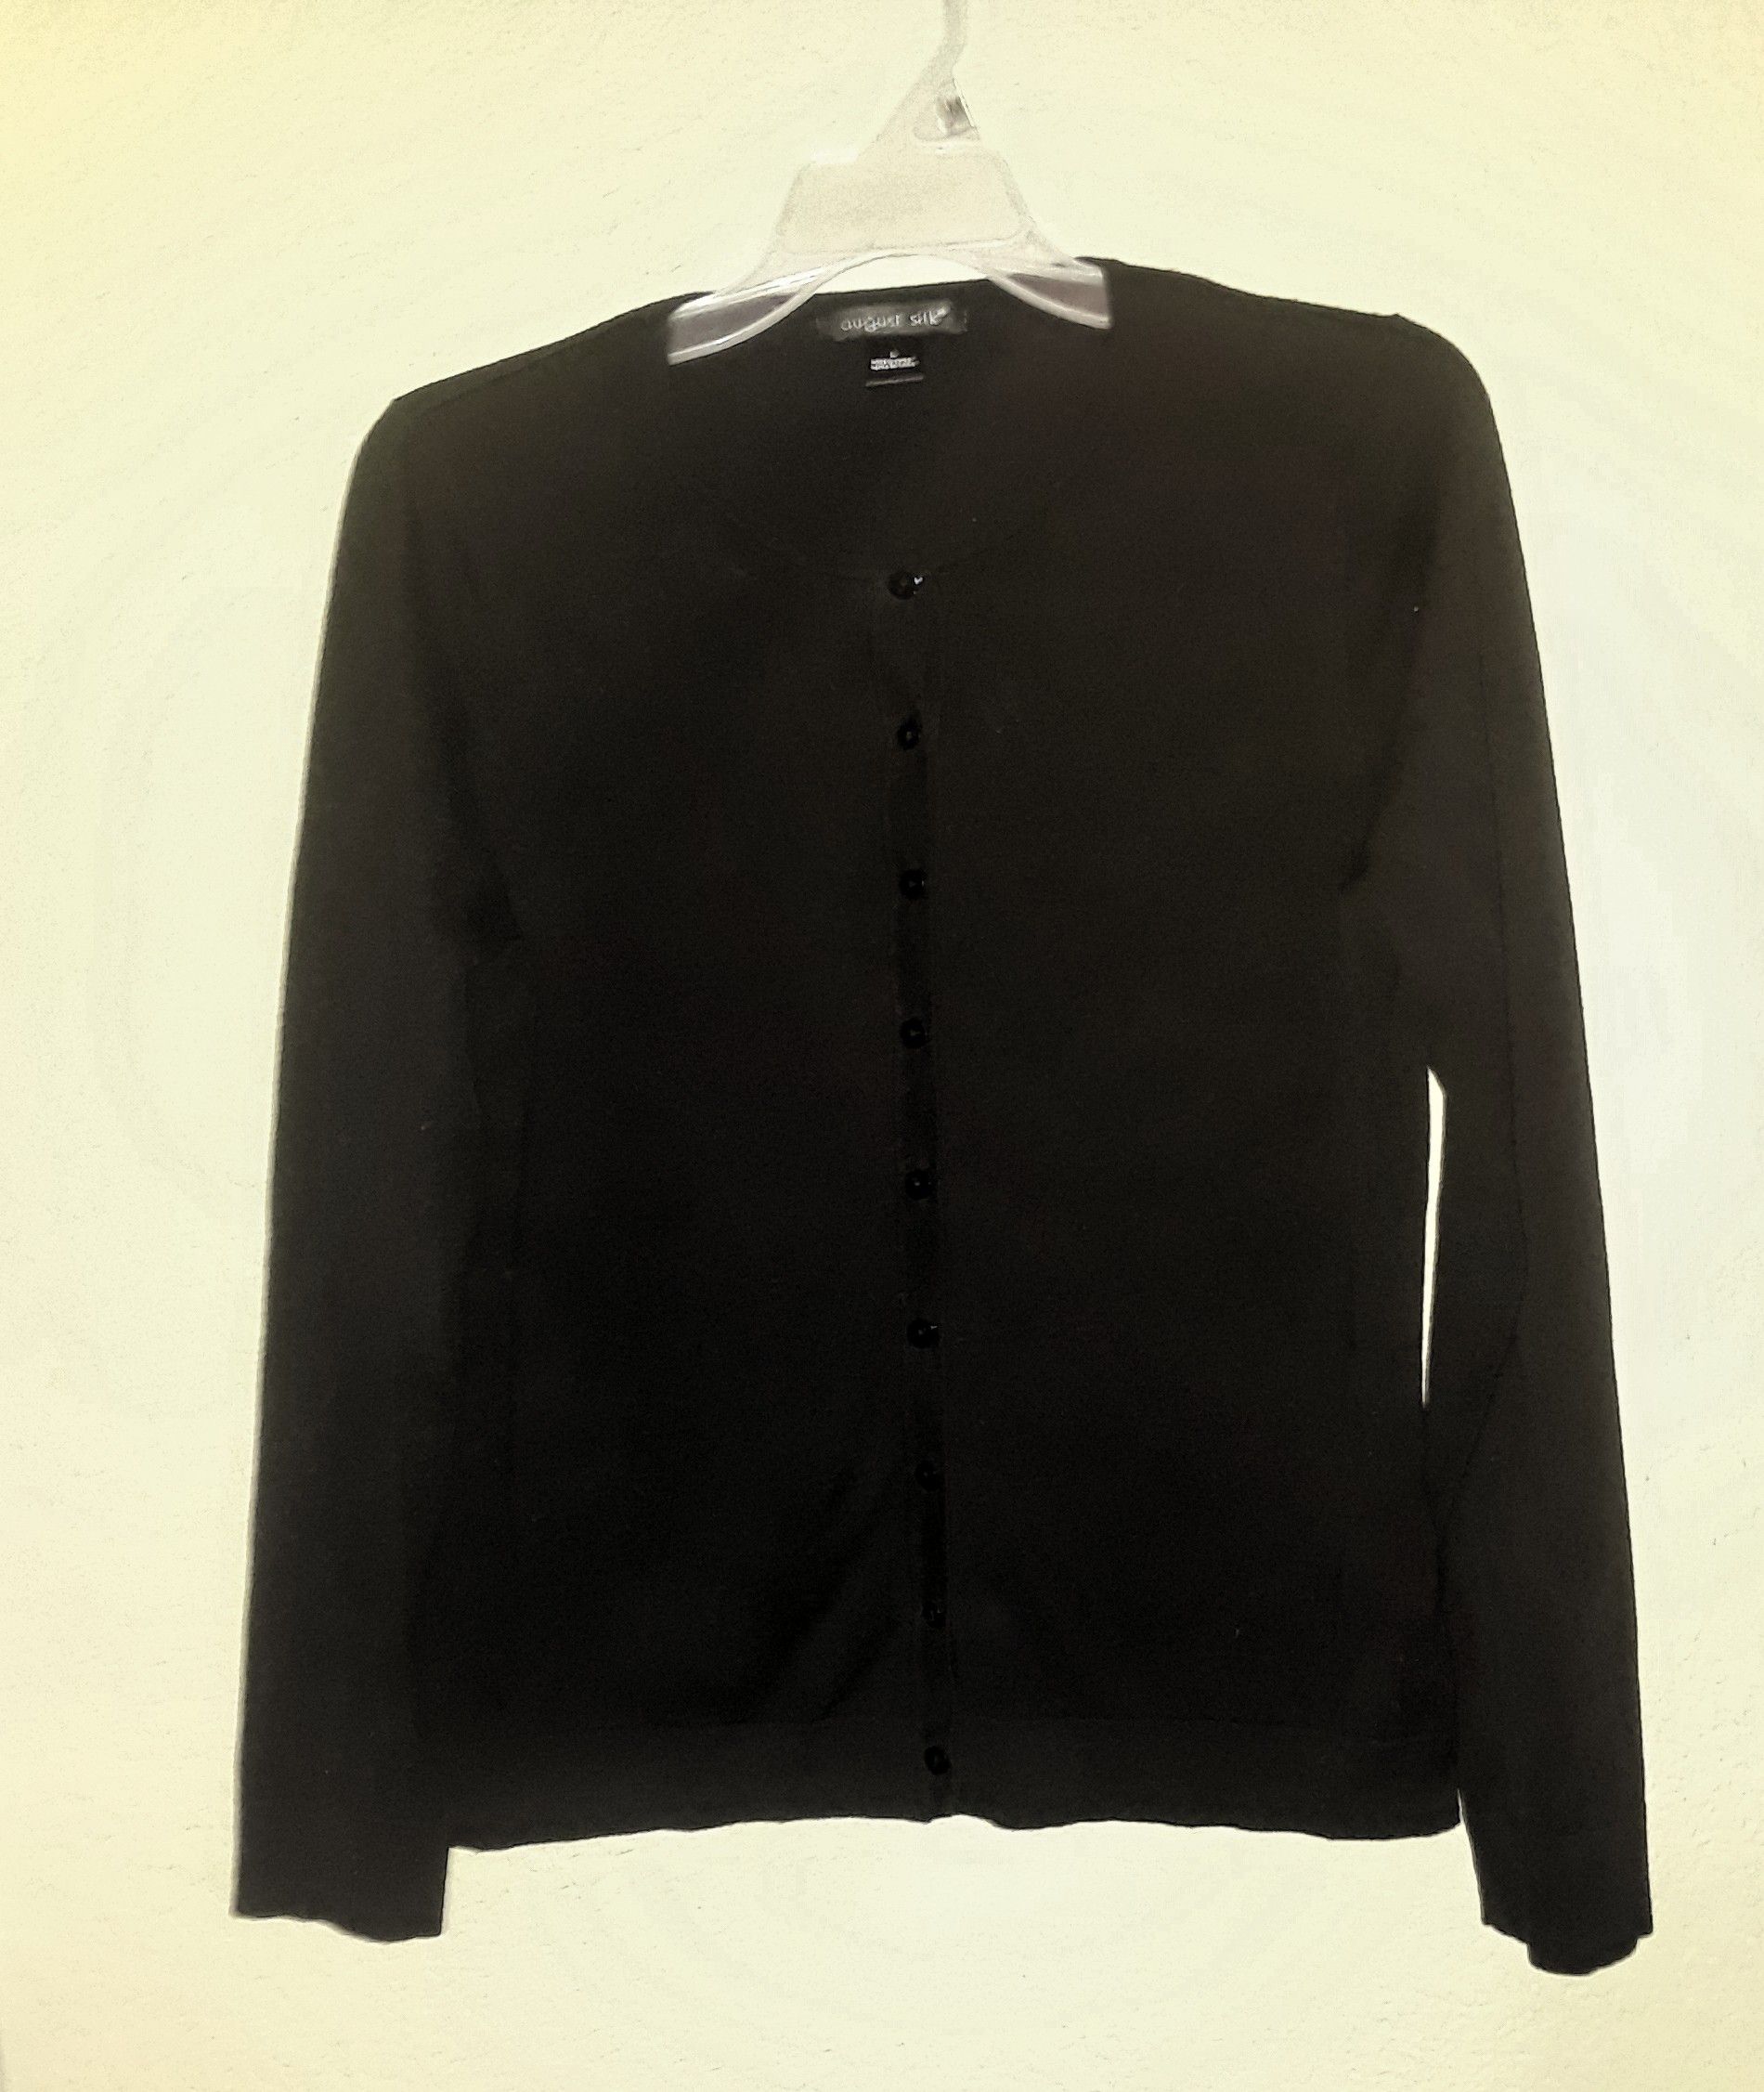 Black button up cardigan by August Silk size large